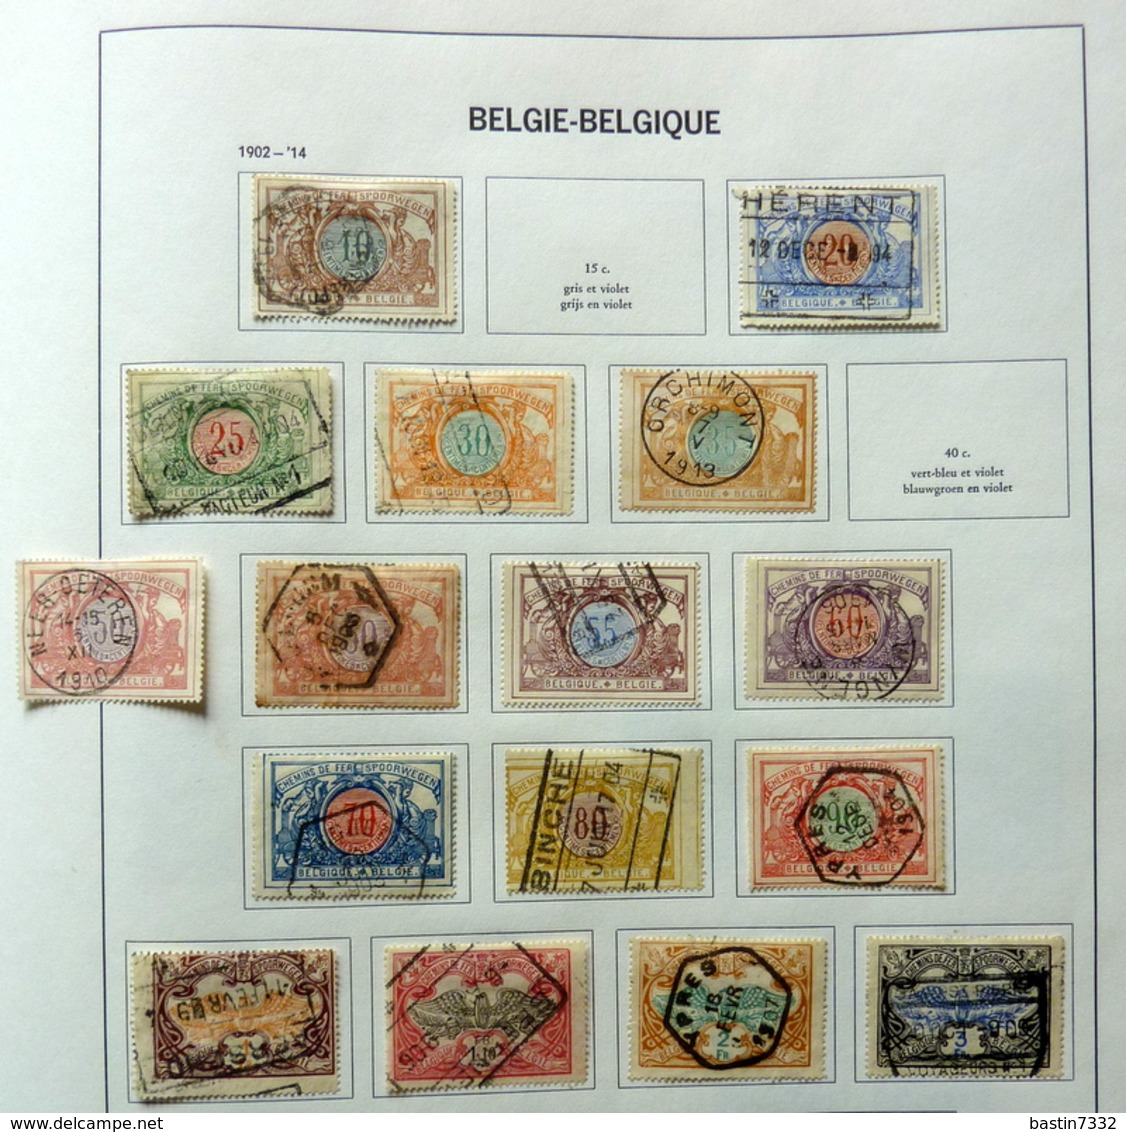 België/Belgium/Belgique collection in Davo binder with better sets (mixed quality)